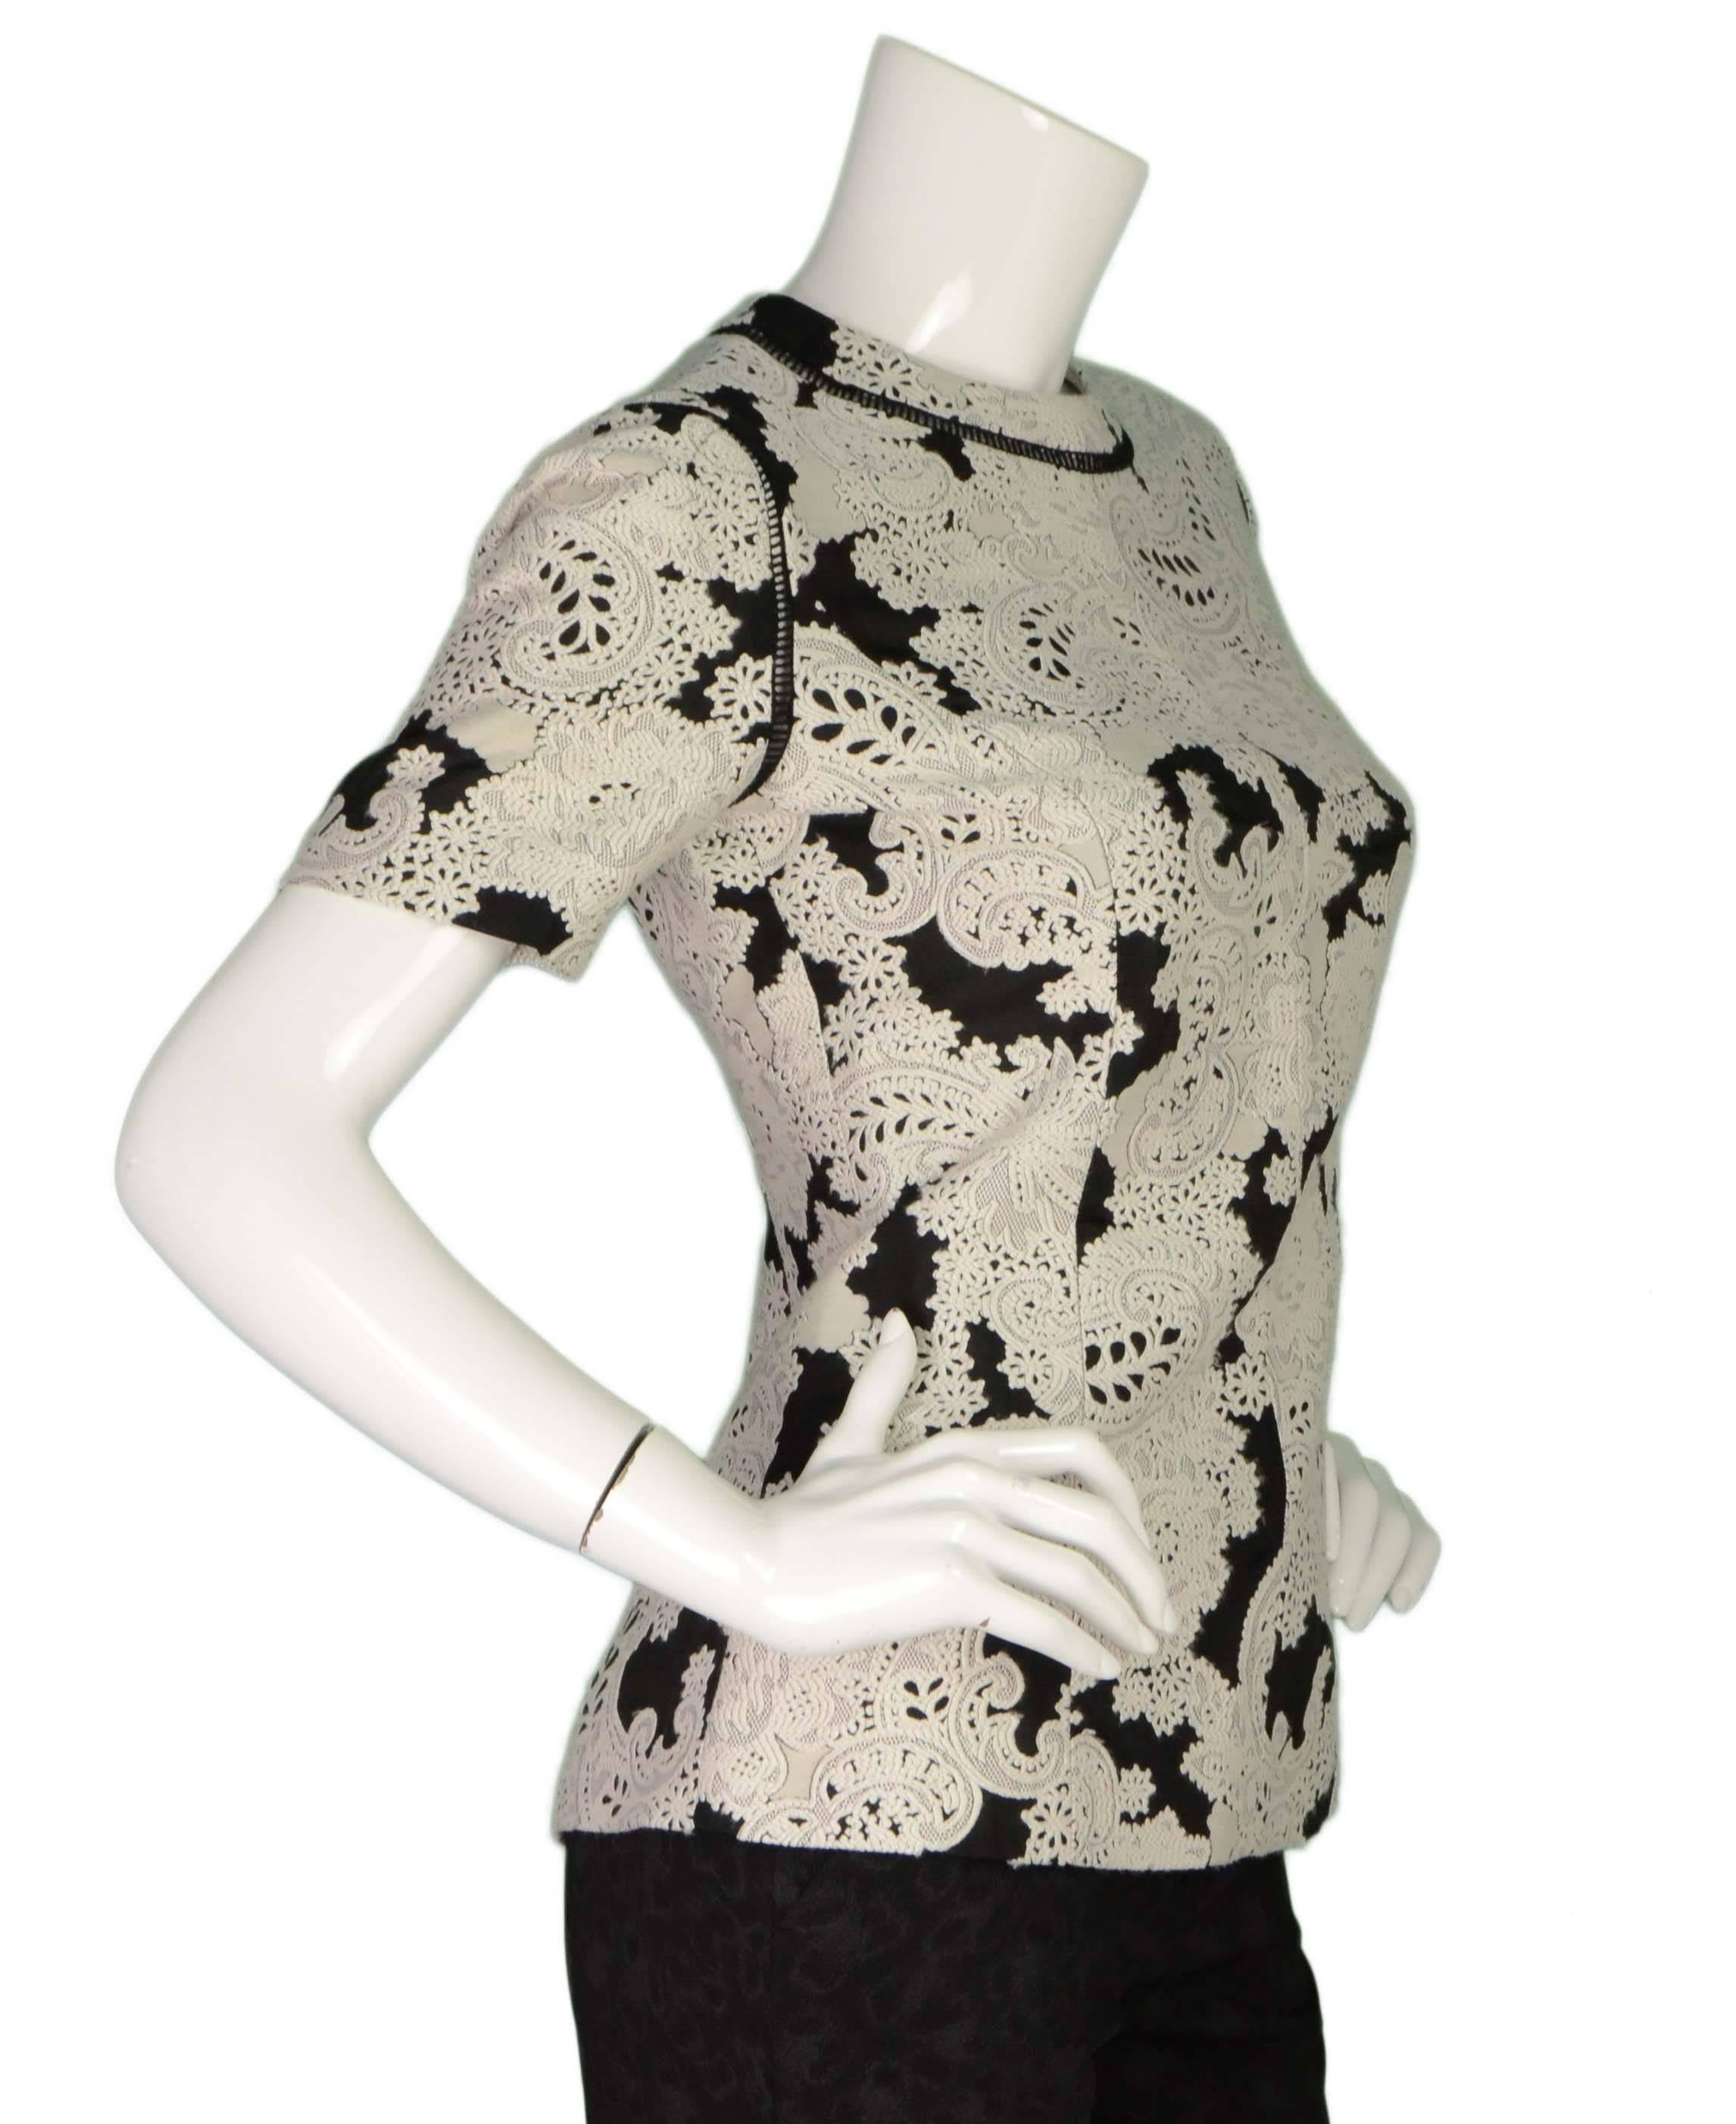 Derek Lam Black & White Paisley Short Sleeve Top 
Features cut out lace detailing at neckline and shoulder seams
Made In: Bulgaria
Color: Black and white
Composition: 45% wool, 39% rayon, 9% silk, 7% polyester
Lining: None
Closure/Opening: